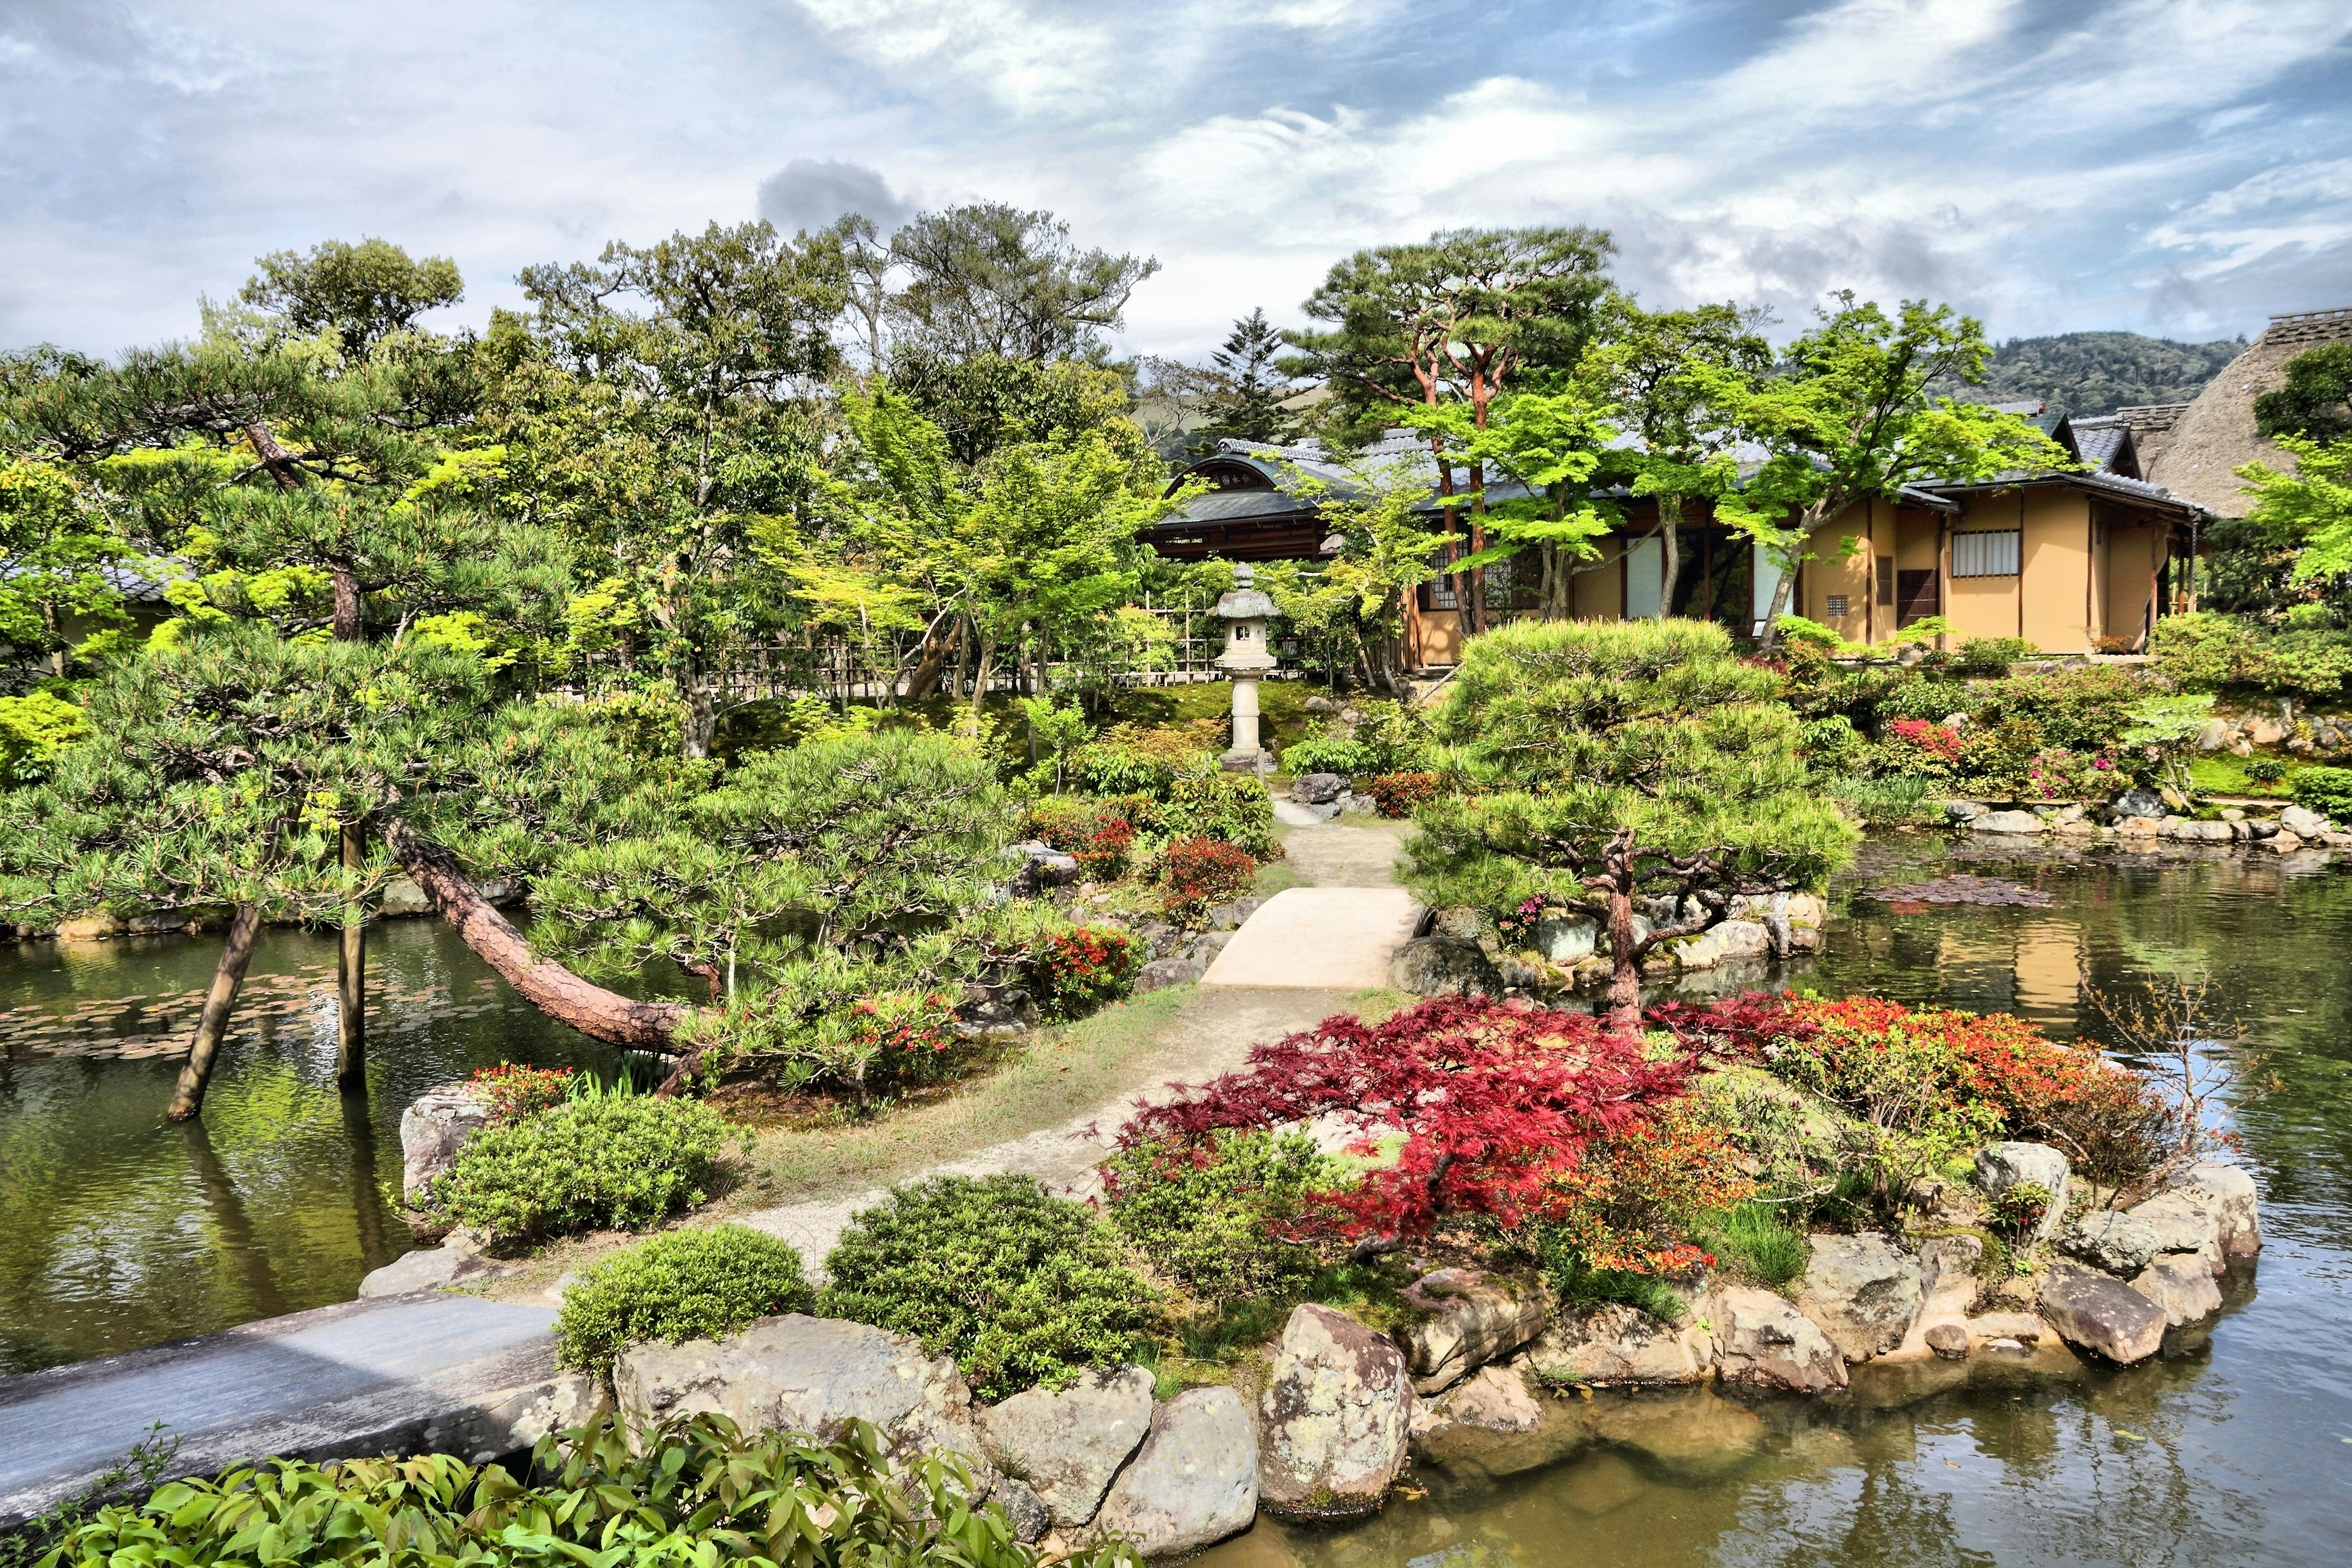 The elegant Isui-en garden, with a path winding past lakes, stones, trees and shrubs to a low-level building beyond.